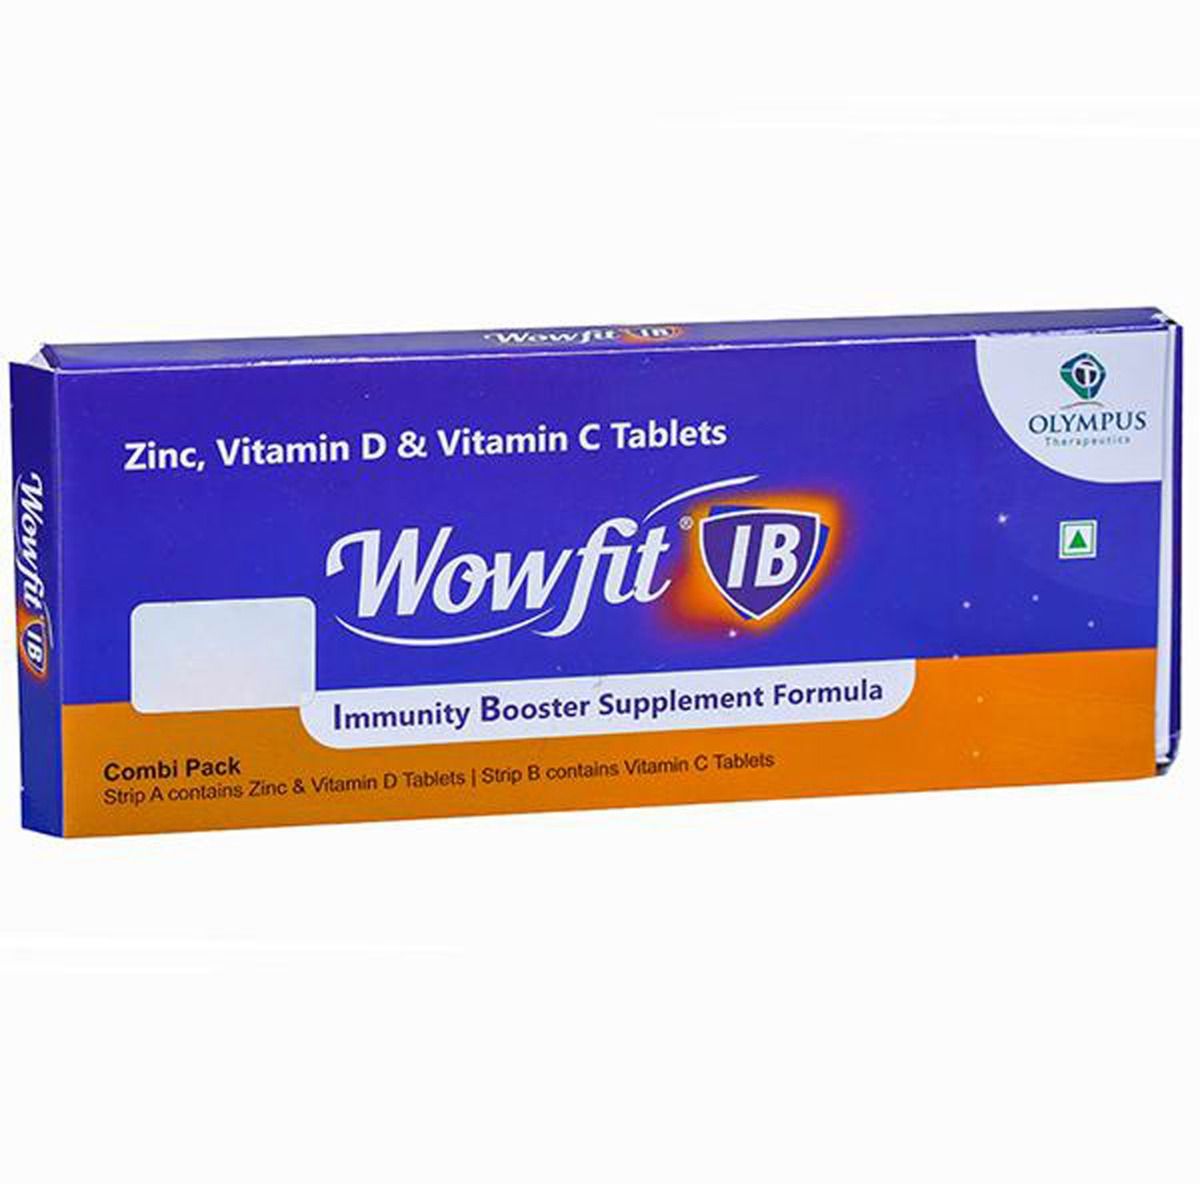 Wowfit-Ib, 20 Tablets, Pack of 10 S